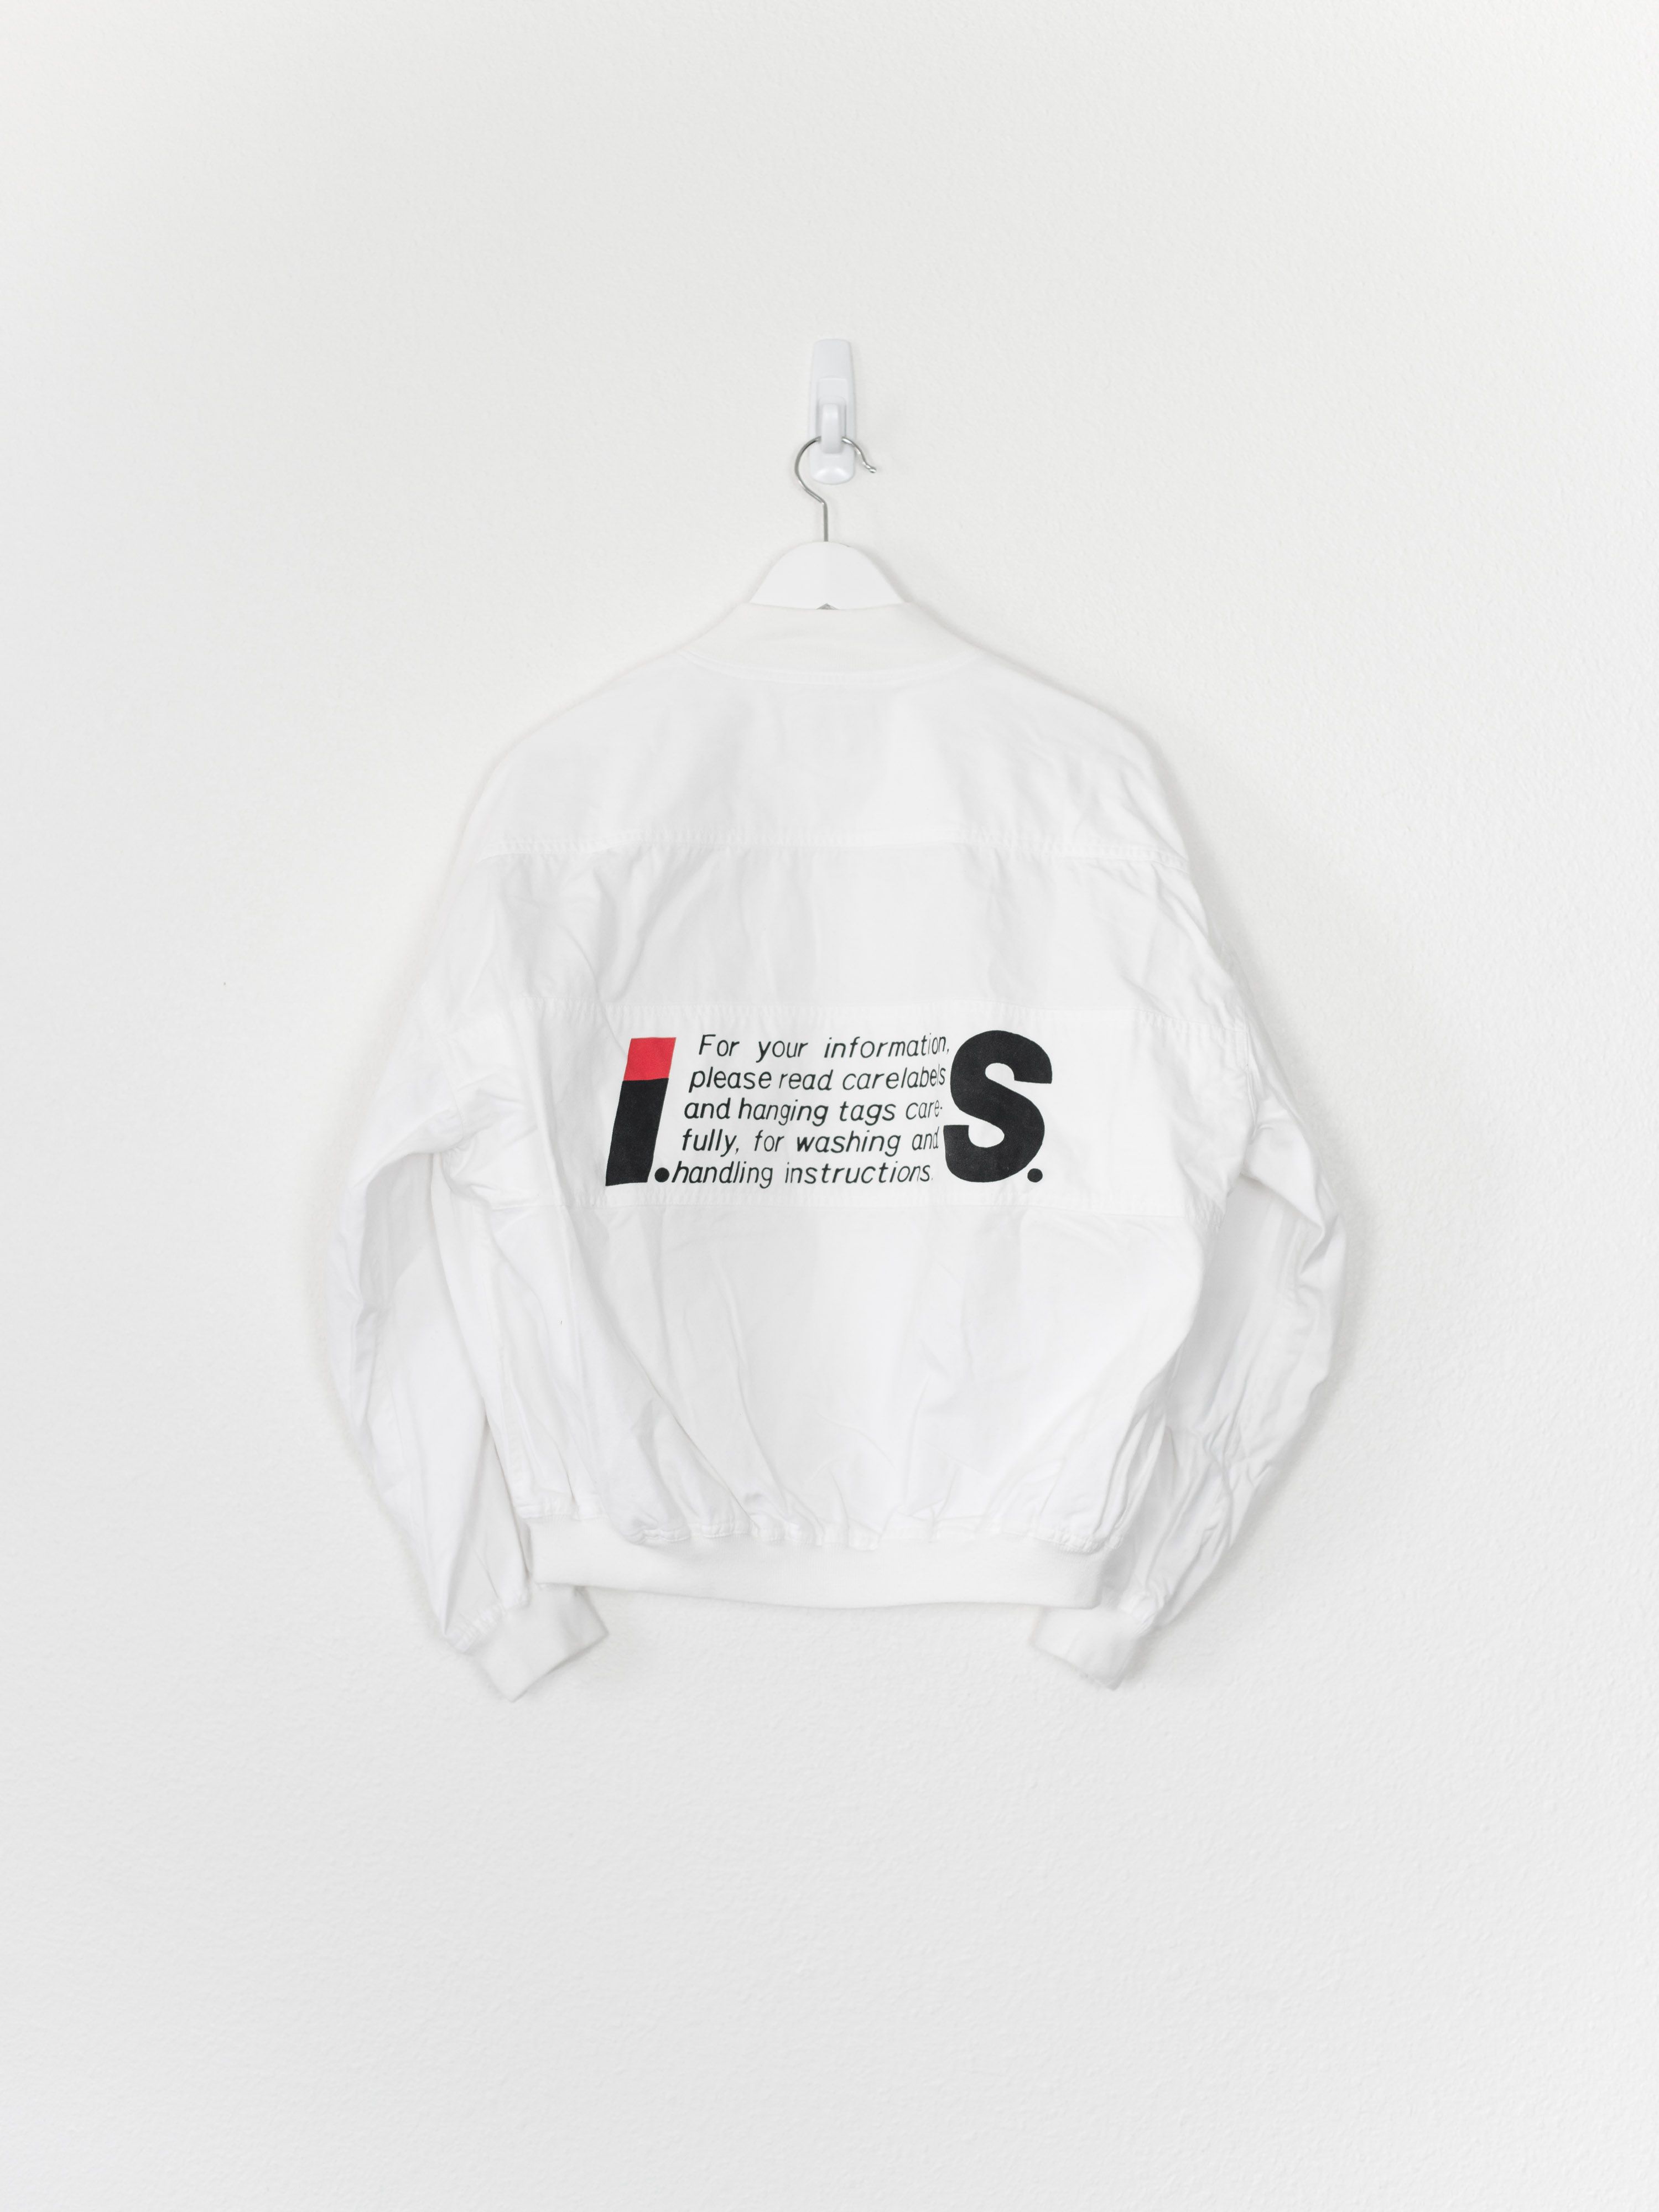 Issey Miyake Issey Sport MA-1 Bomber | Grailed